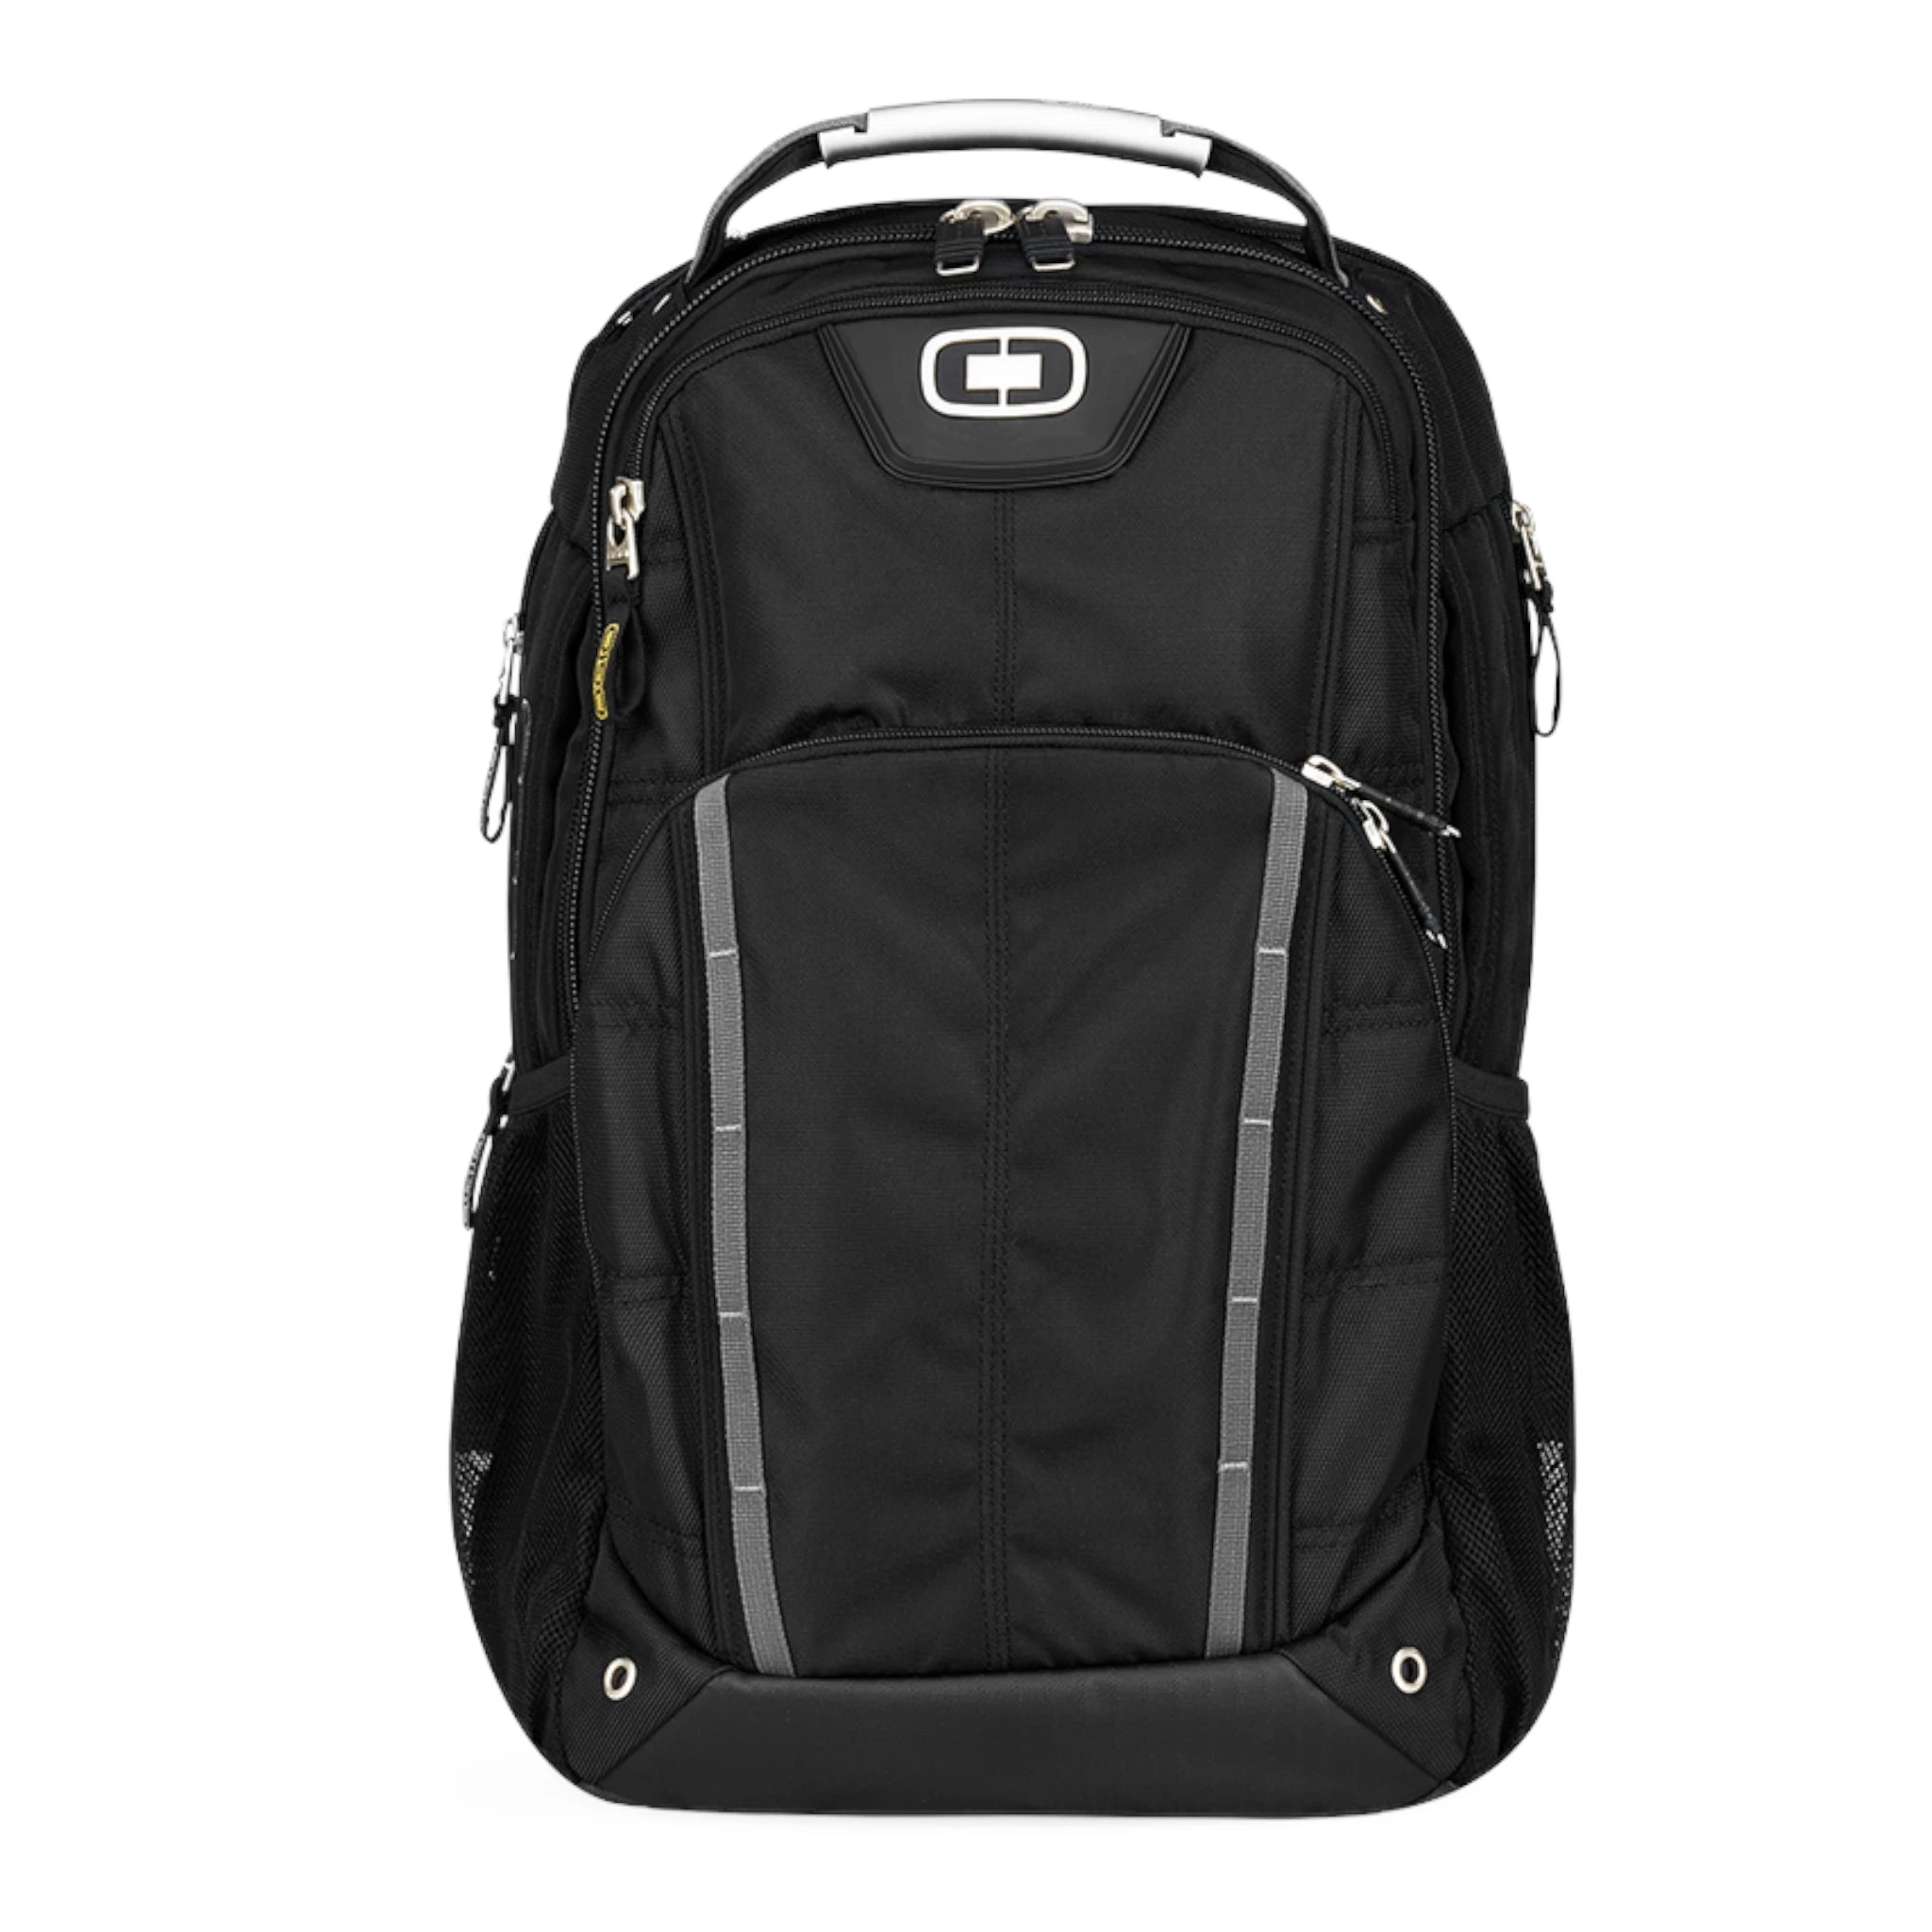 AXLE LAPTOP BACKPACK